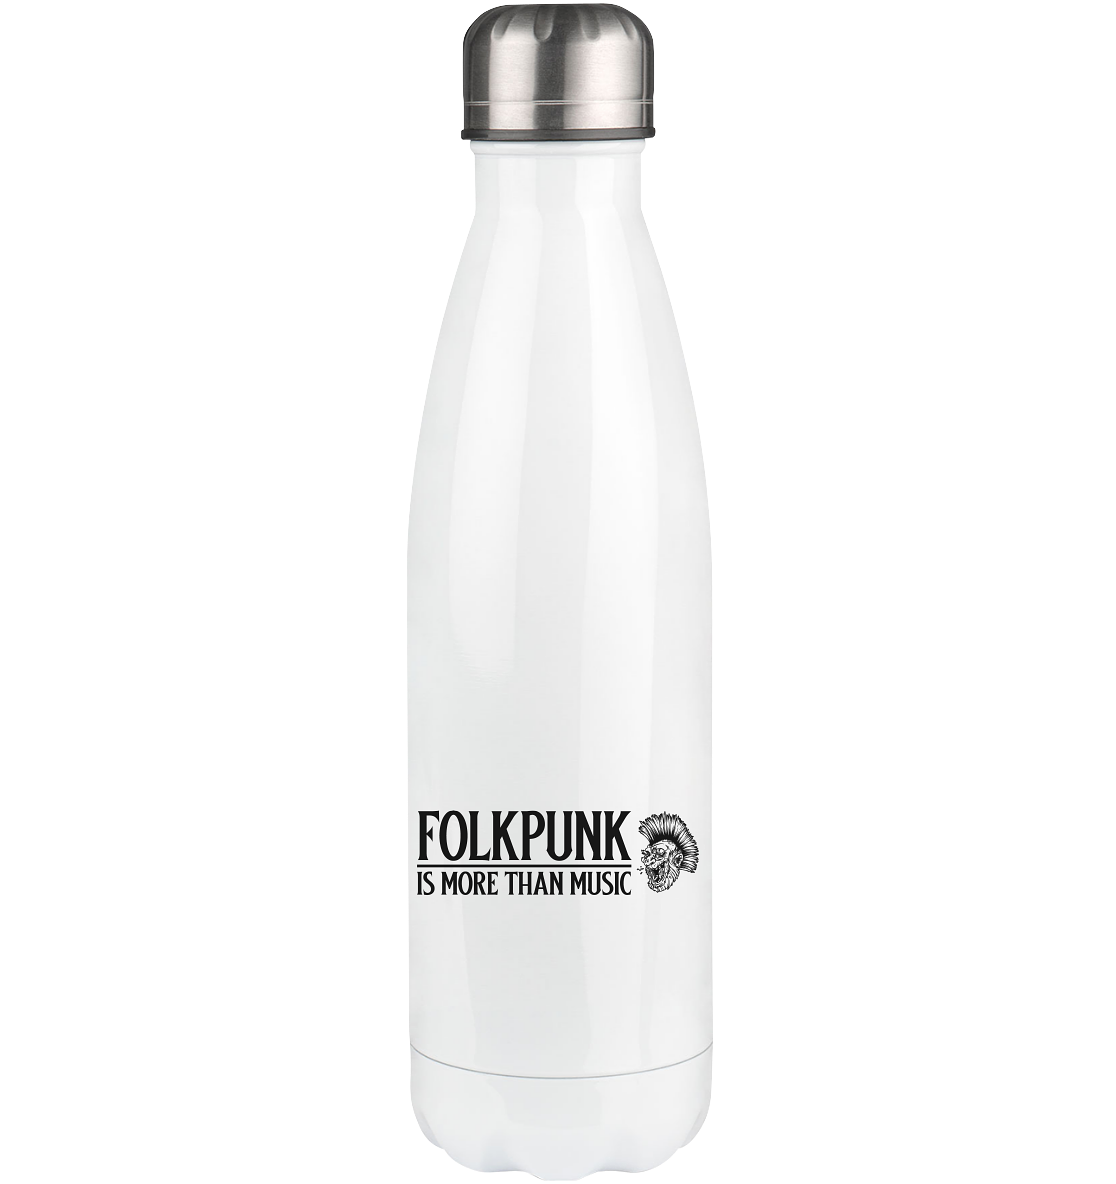 Folkpunk "Is More Than Music" - Thermoflasche 500ml